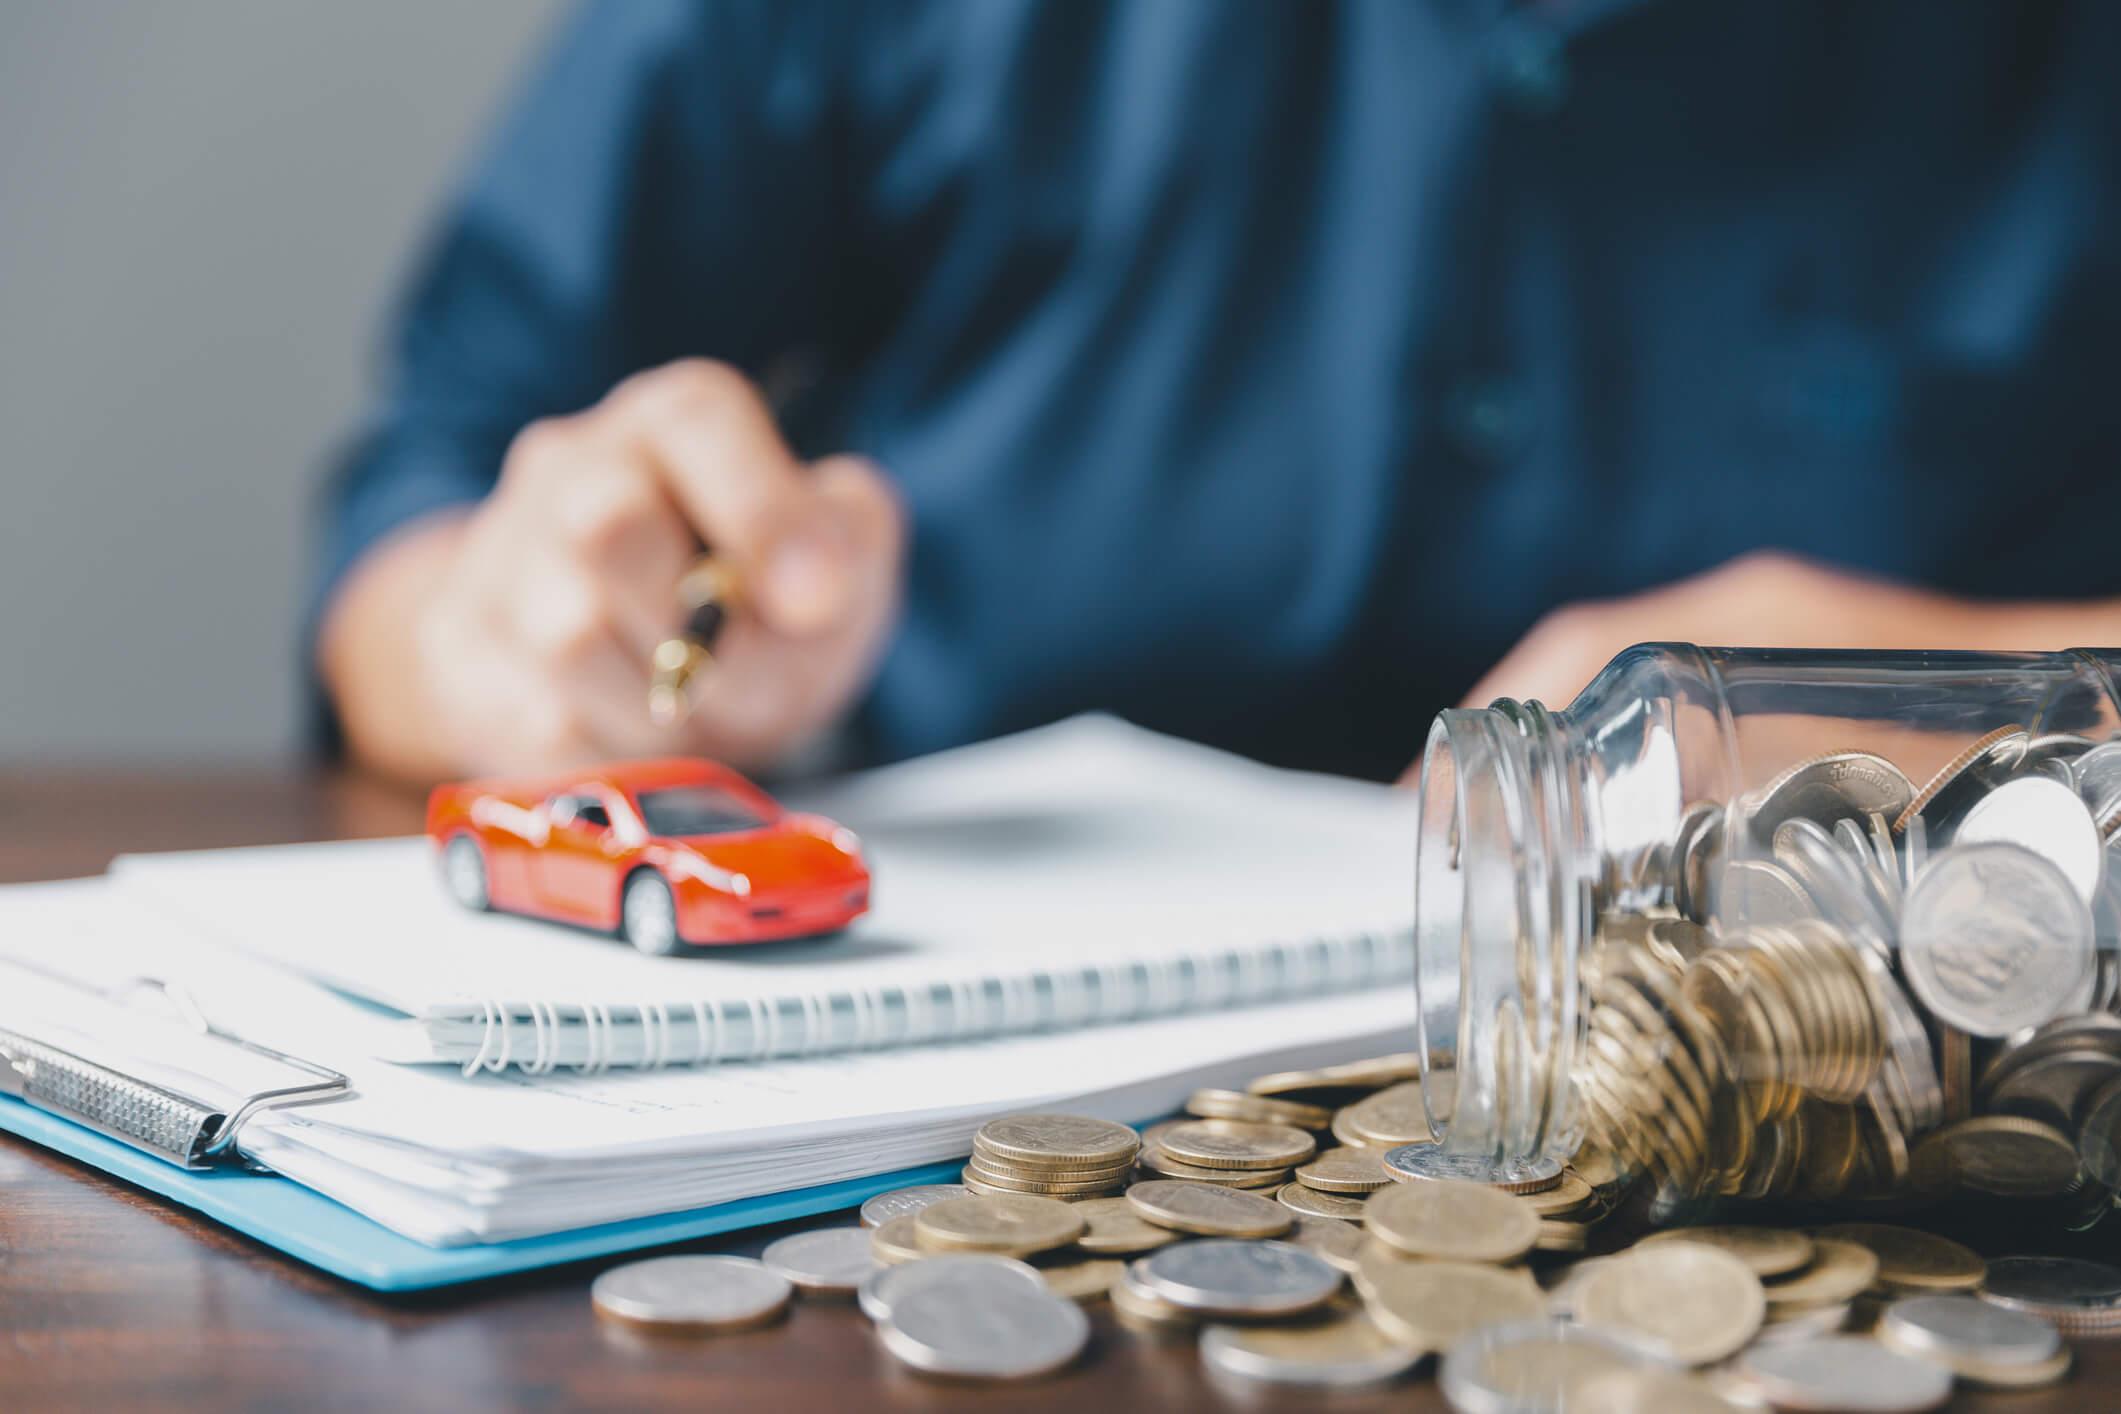 A close up of a desk showing a hand writing and a jar of money, plus a small red toy car